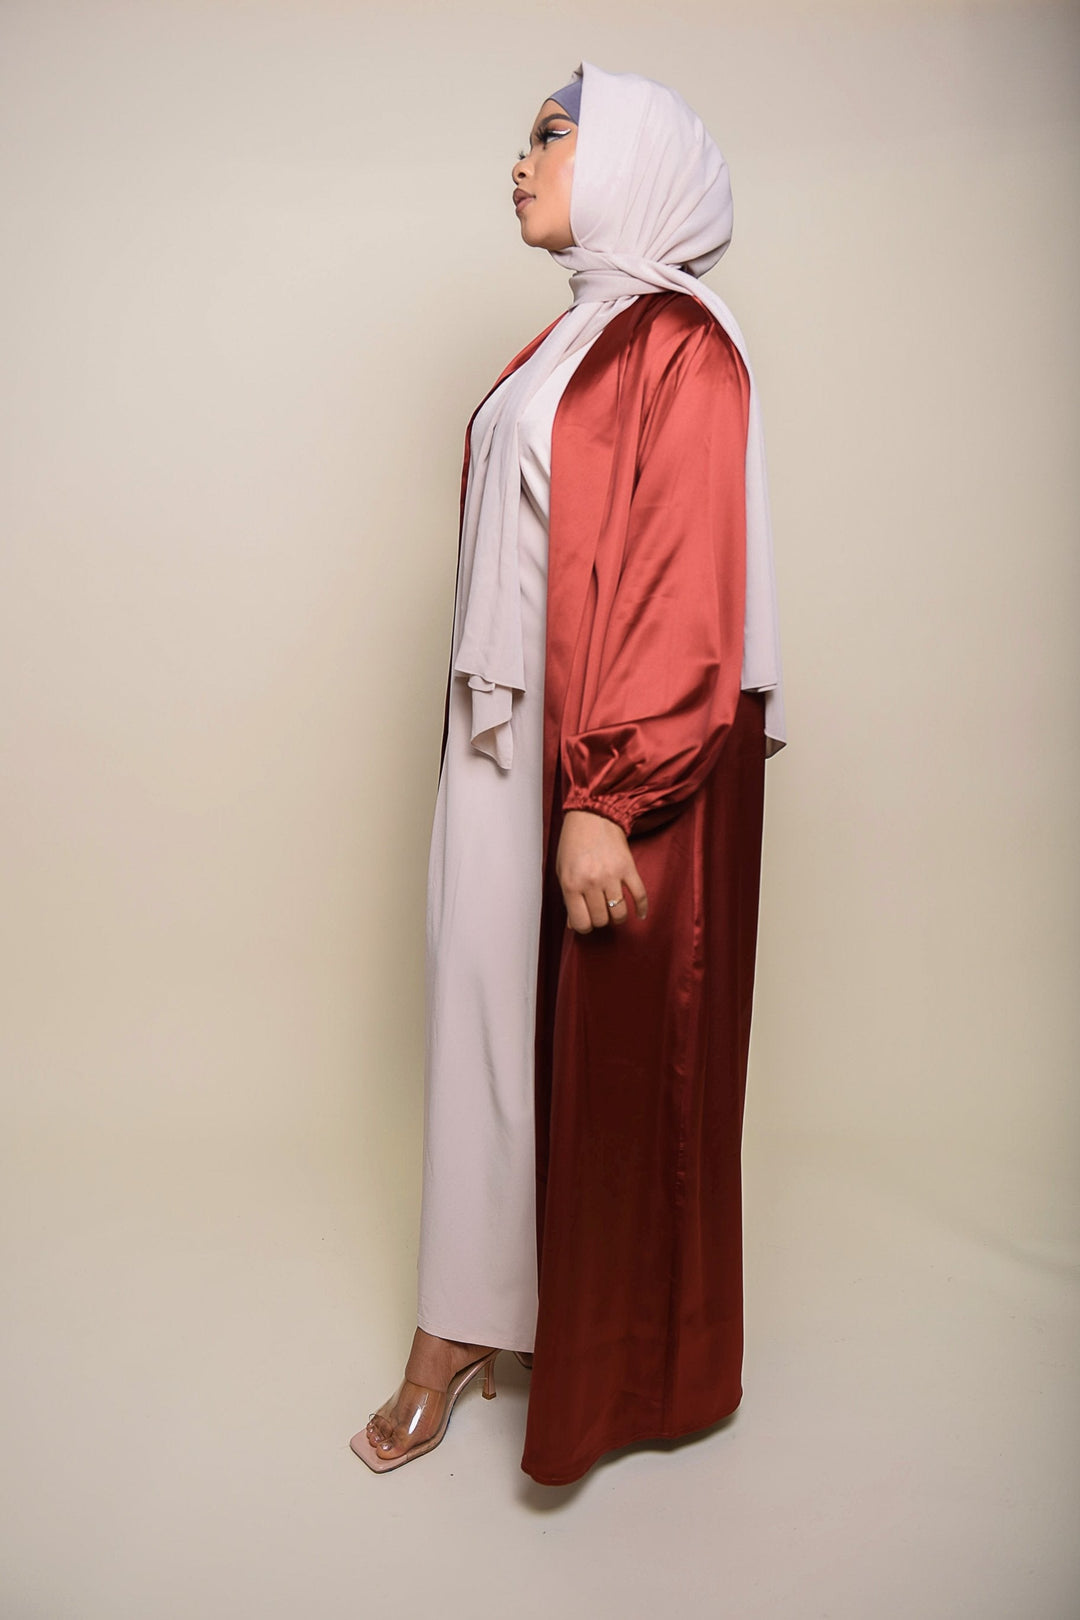 Get trendy with Julissa Satin Duster - Fire Brick - Dresses available at Voilee NY. Grab yours for $34.99 today!